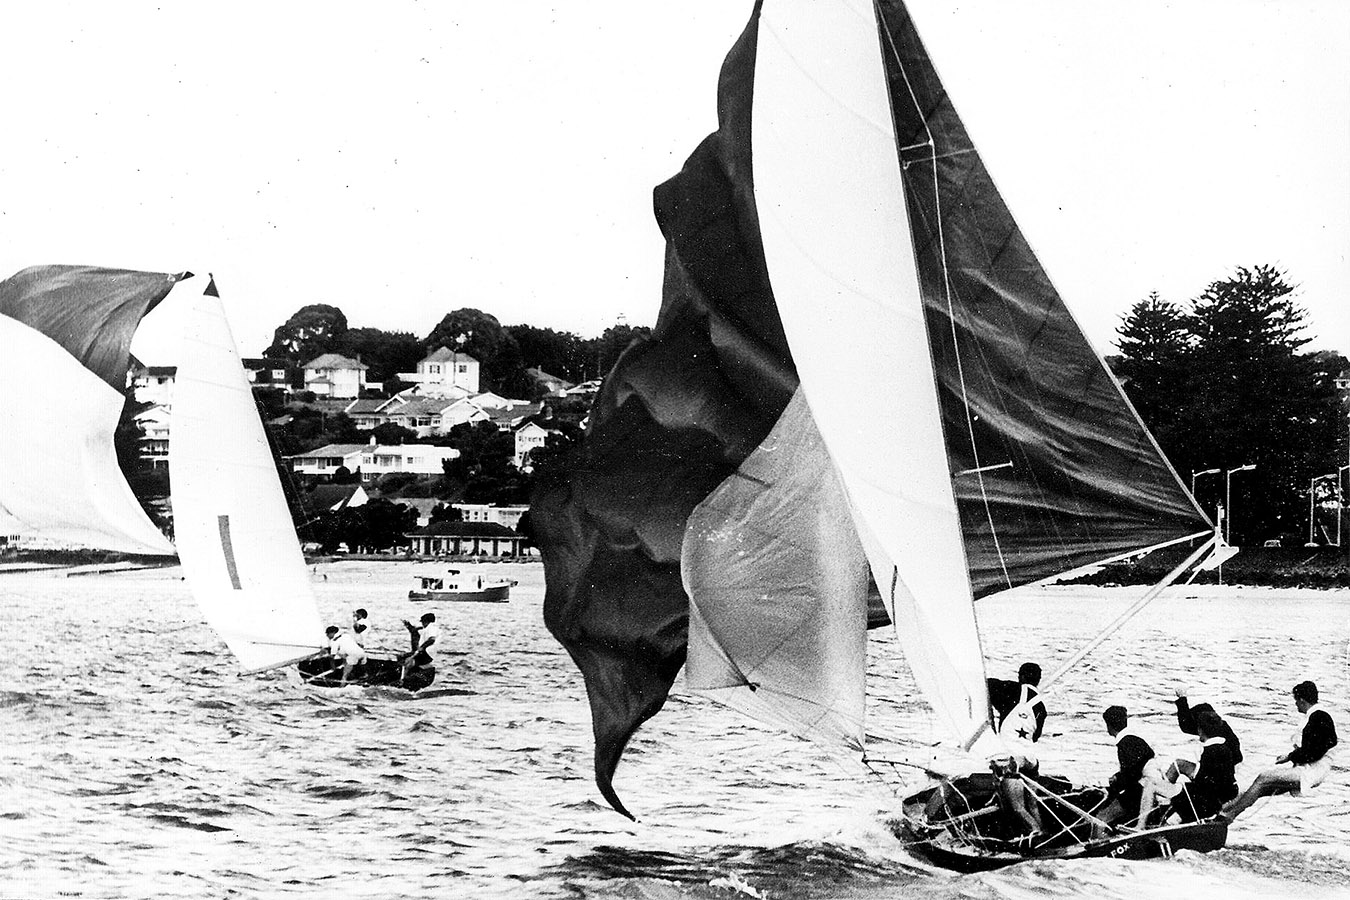 Schemer leads The Fox at the 1963 Giltinan Championship in Auckland